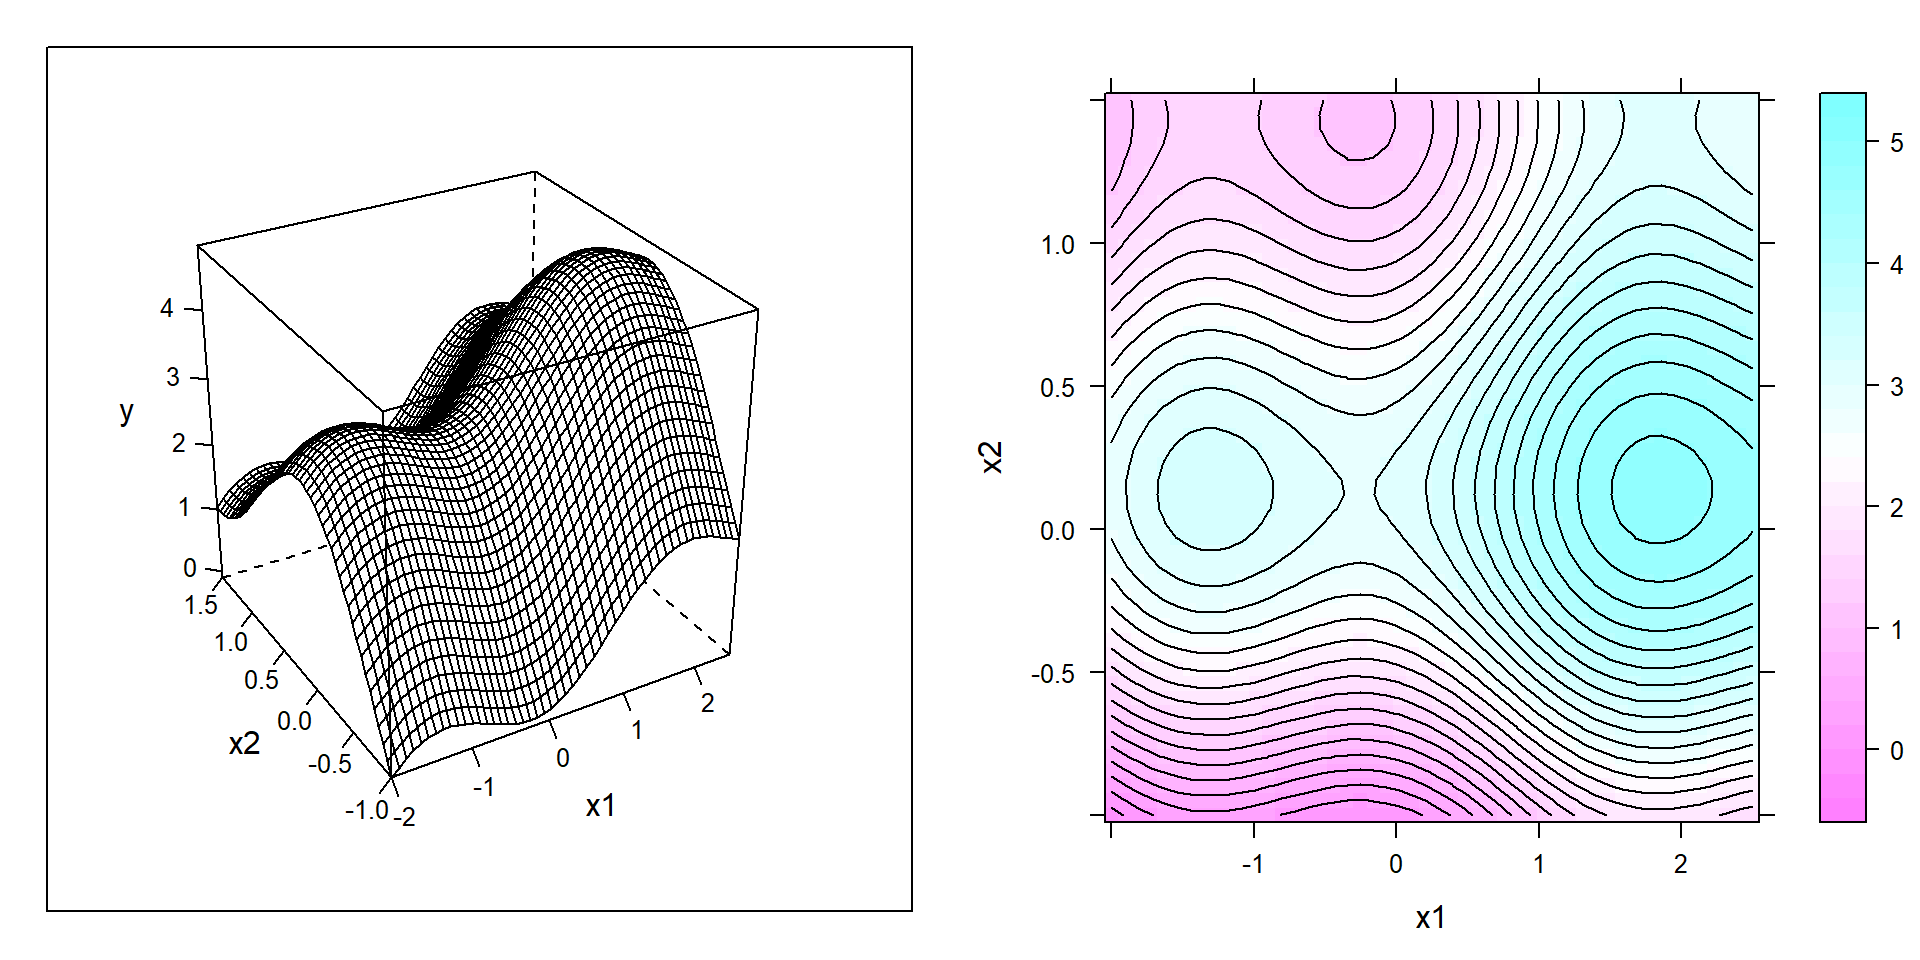 Wireframe (left panel) and contour (right panel) plot of a non-convex example function to be "empirically" maximized in the depicted domain x~1~,x~2~.